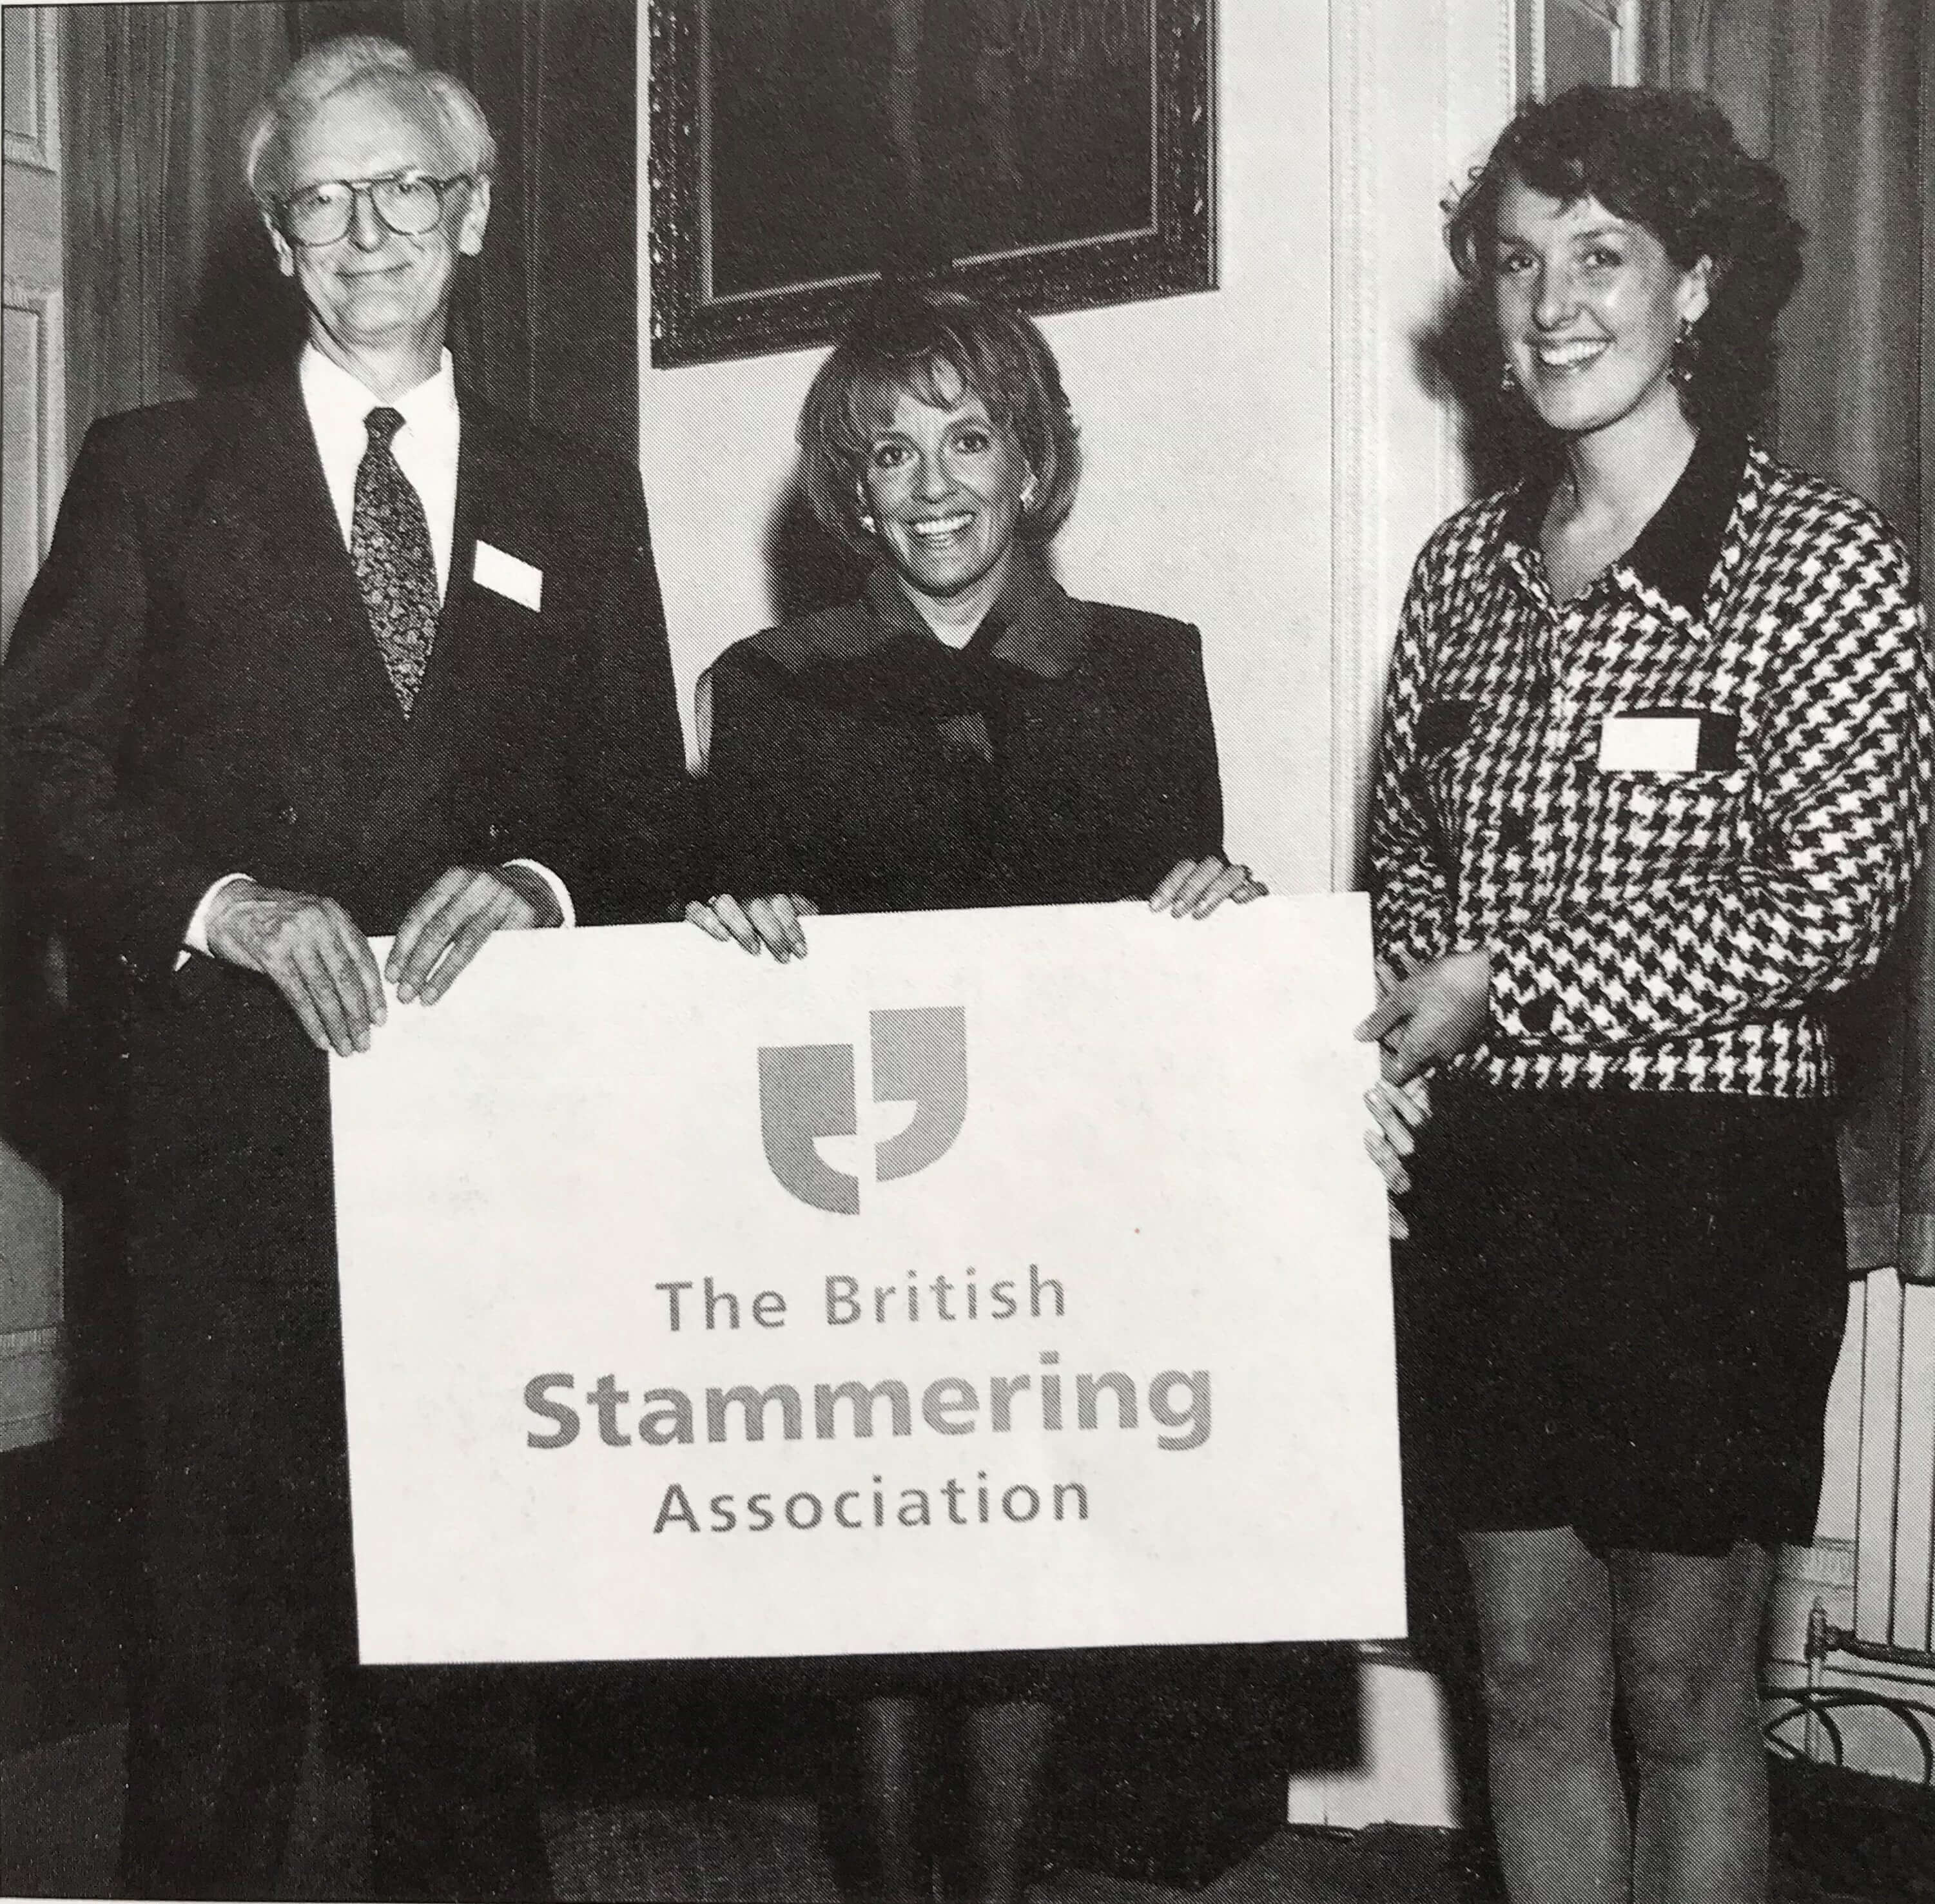 A black and white image of a man and two women holding a sign with the British Stammering Association logo on it